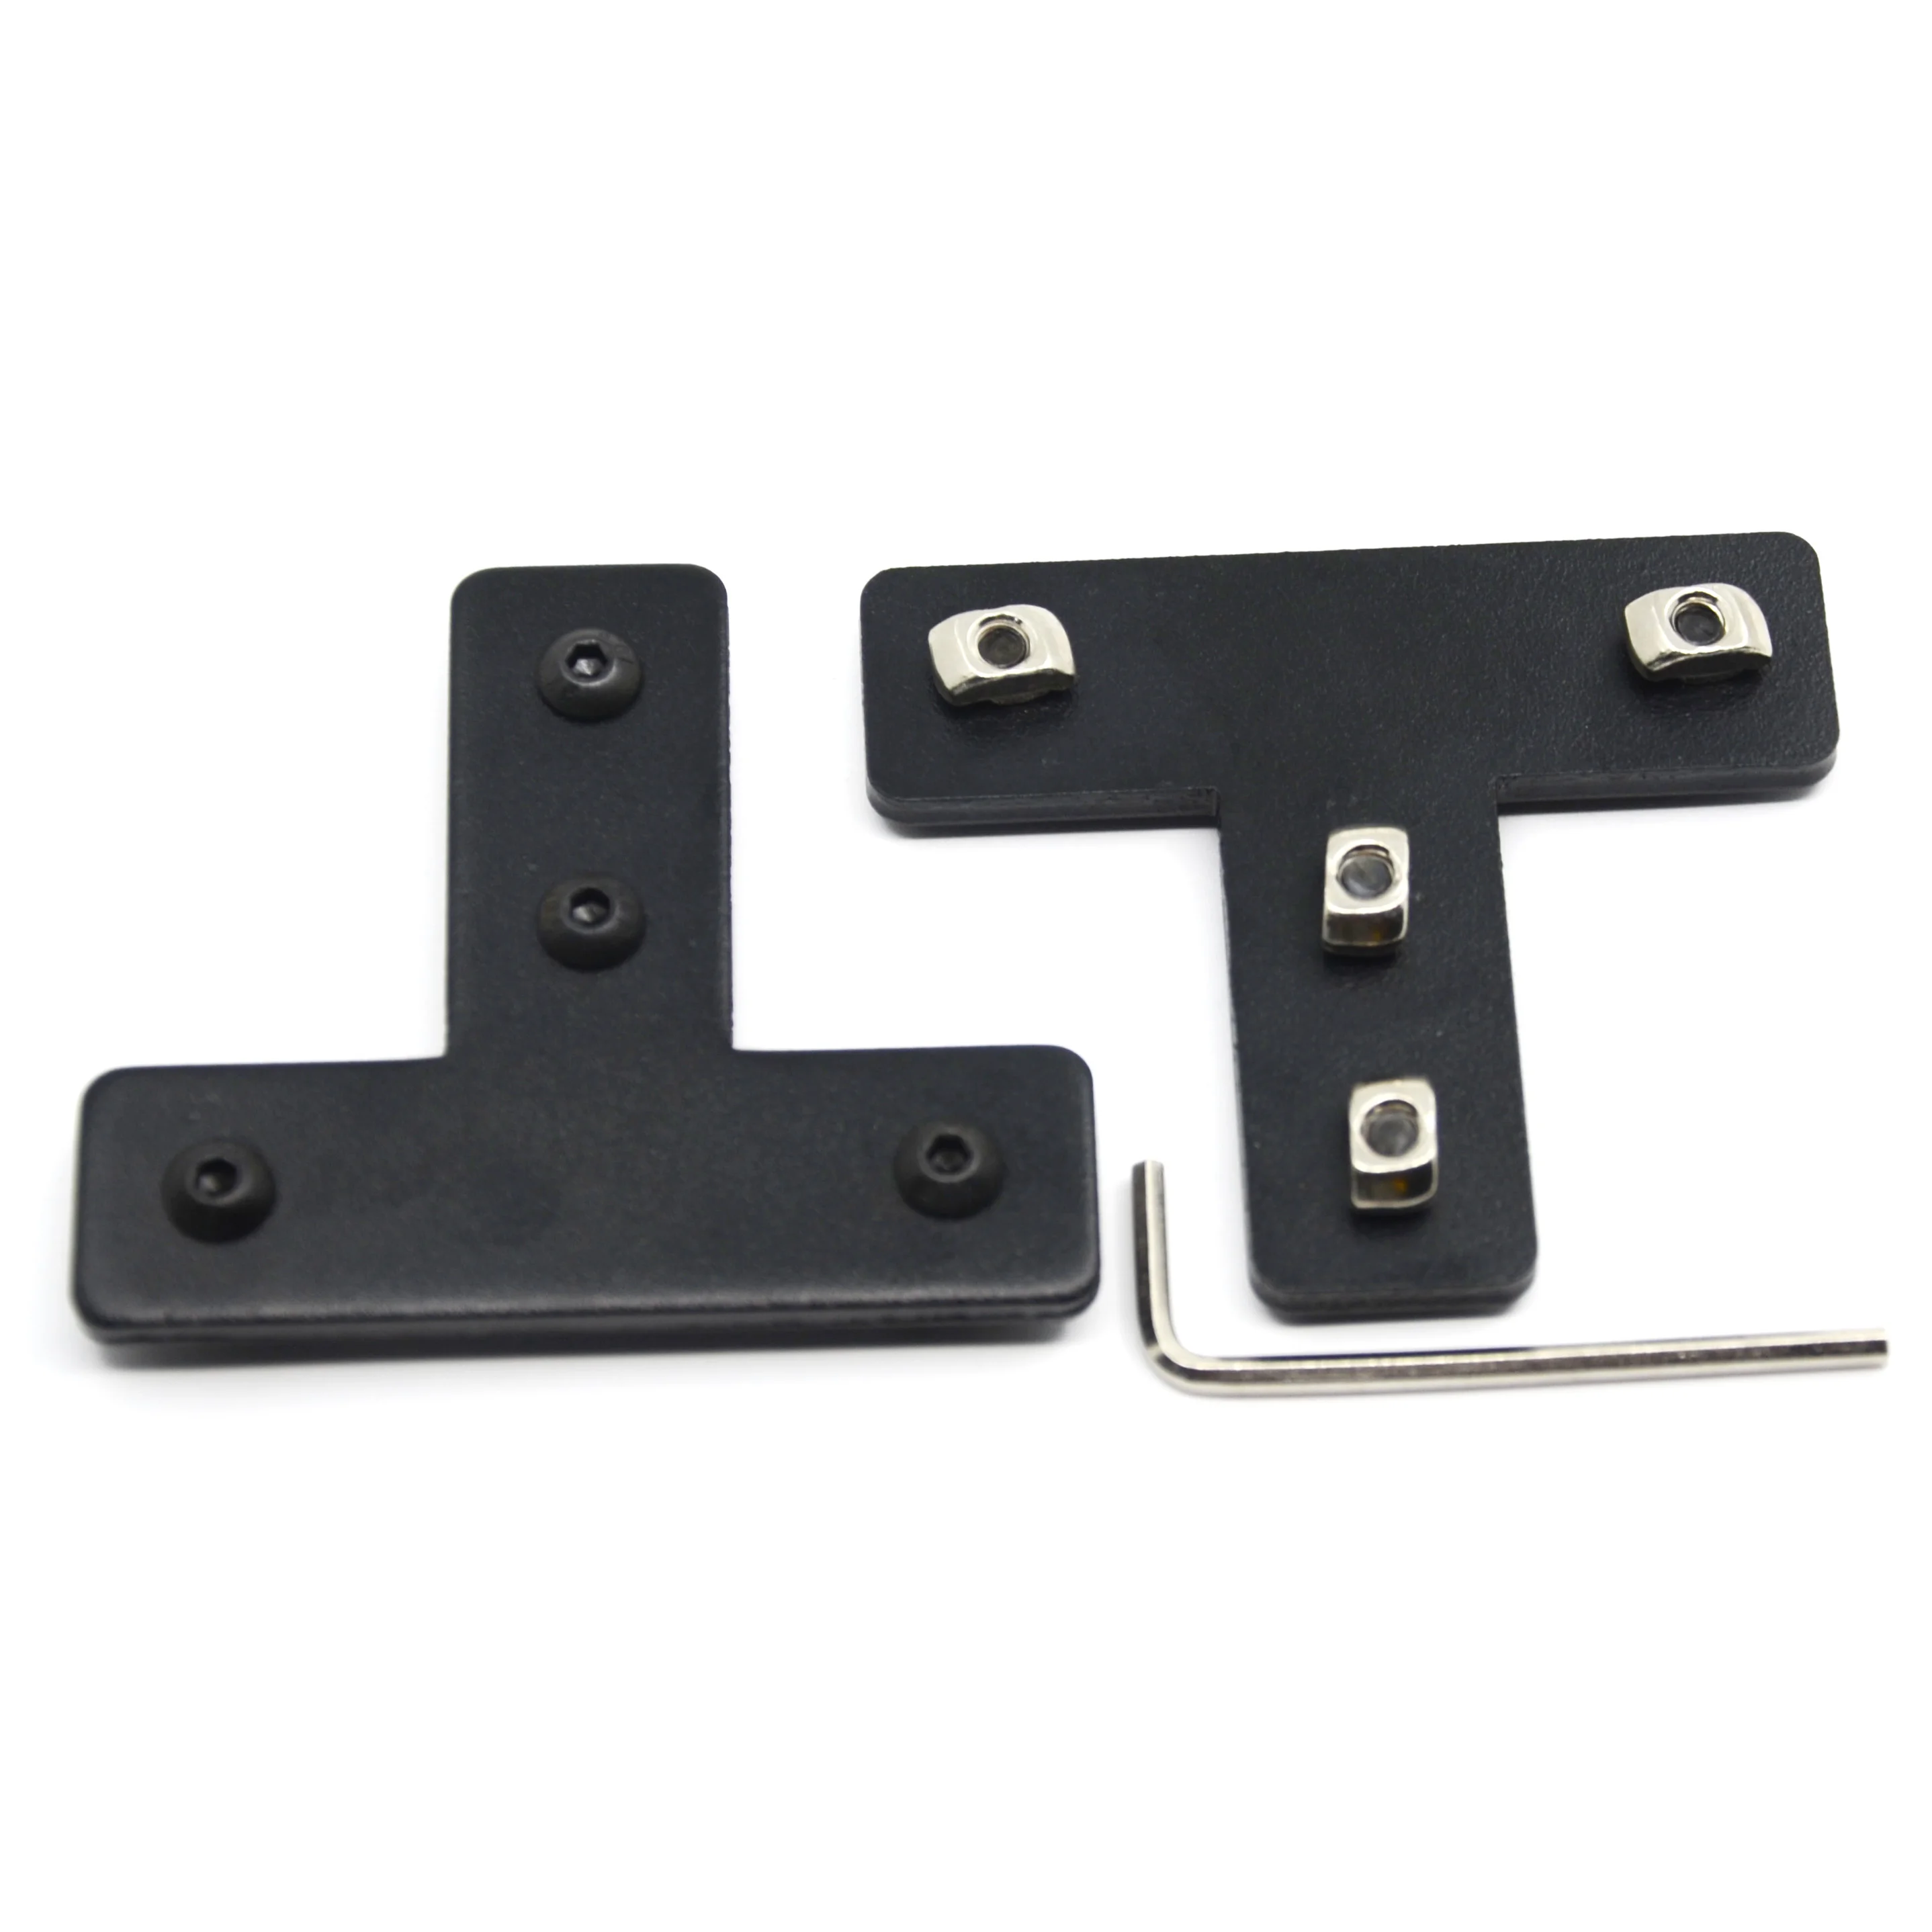 T-Shape Corner Bracket Plate with M4 Screws+M4 T-Nuts, 4-Hole Outside Joining Plate for 2020 Series Aluminum Profile 3D Printer